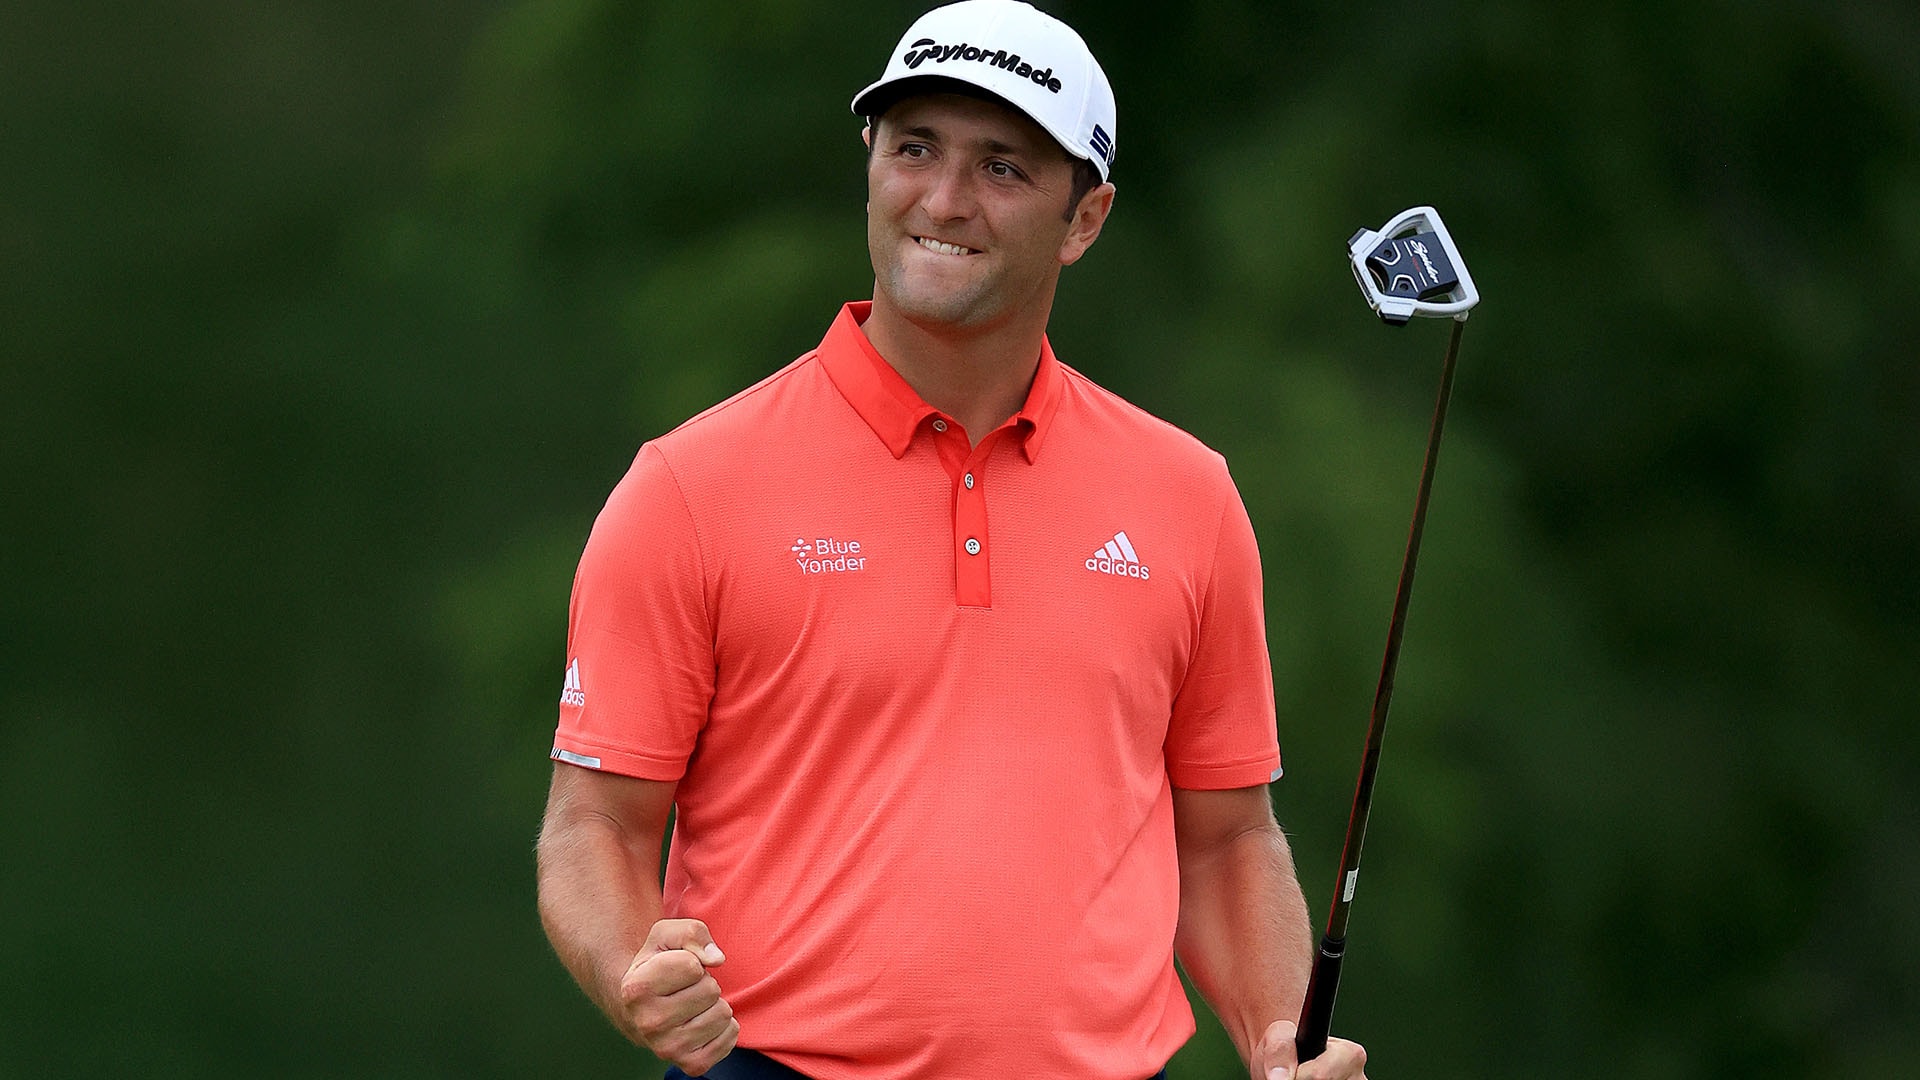 Jon Rahm hangs on for Memorial win to become world No. 1